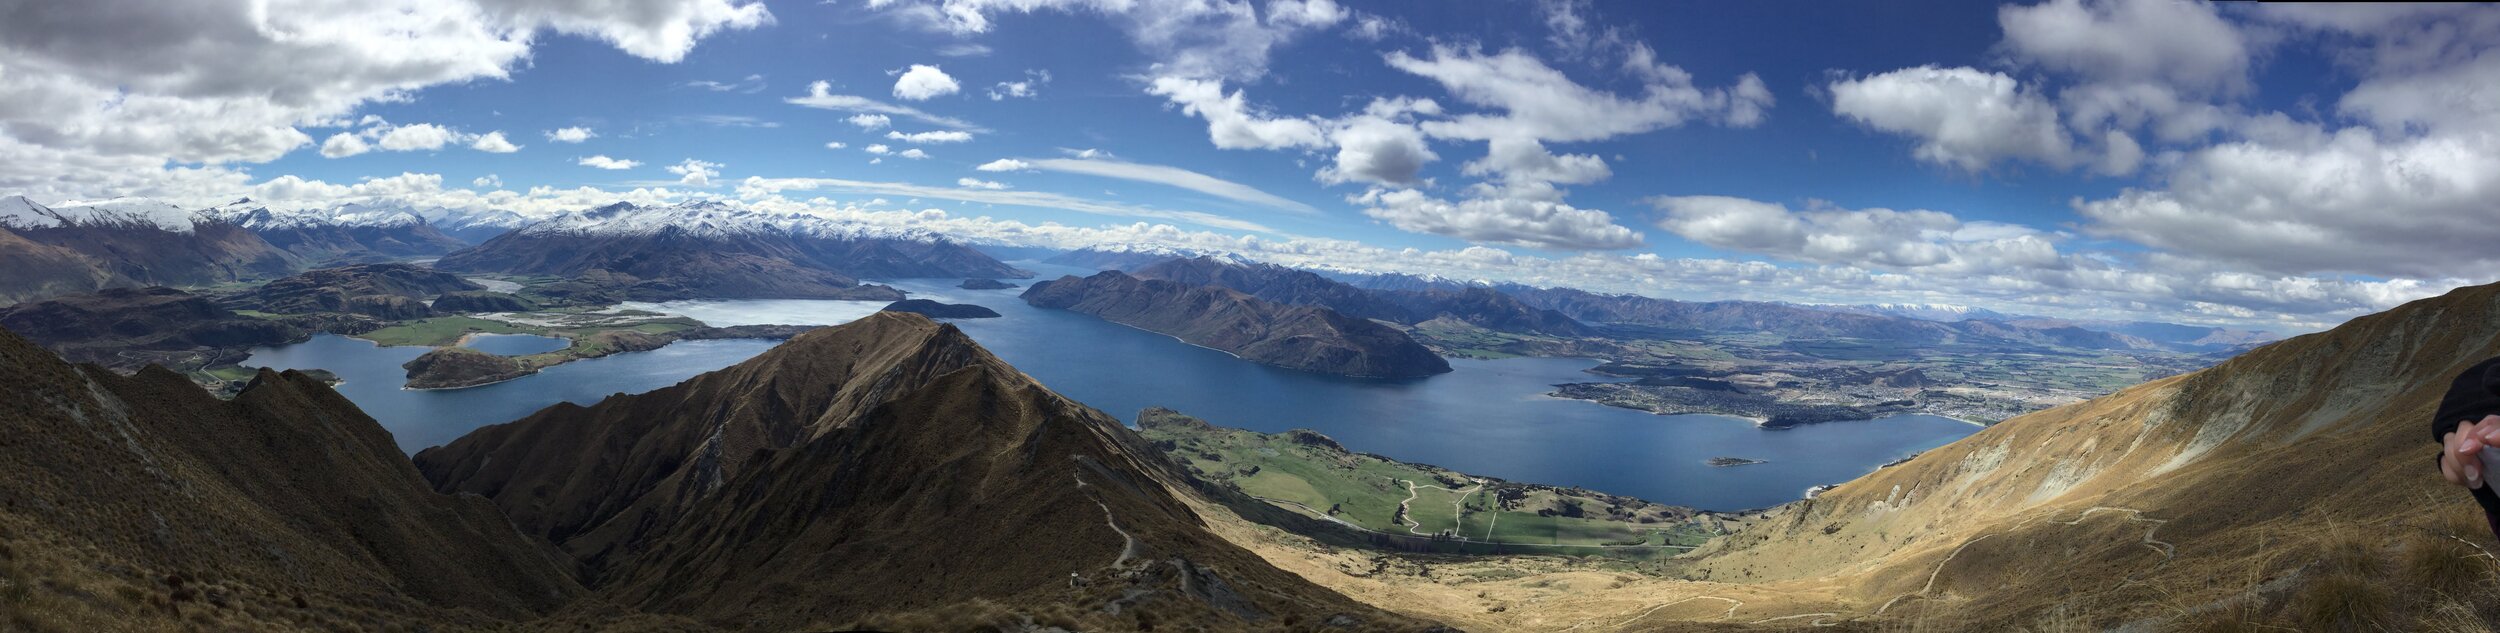 Mount Aspiring to Left and All of Lake Wanaka in the Distance